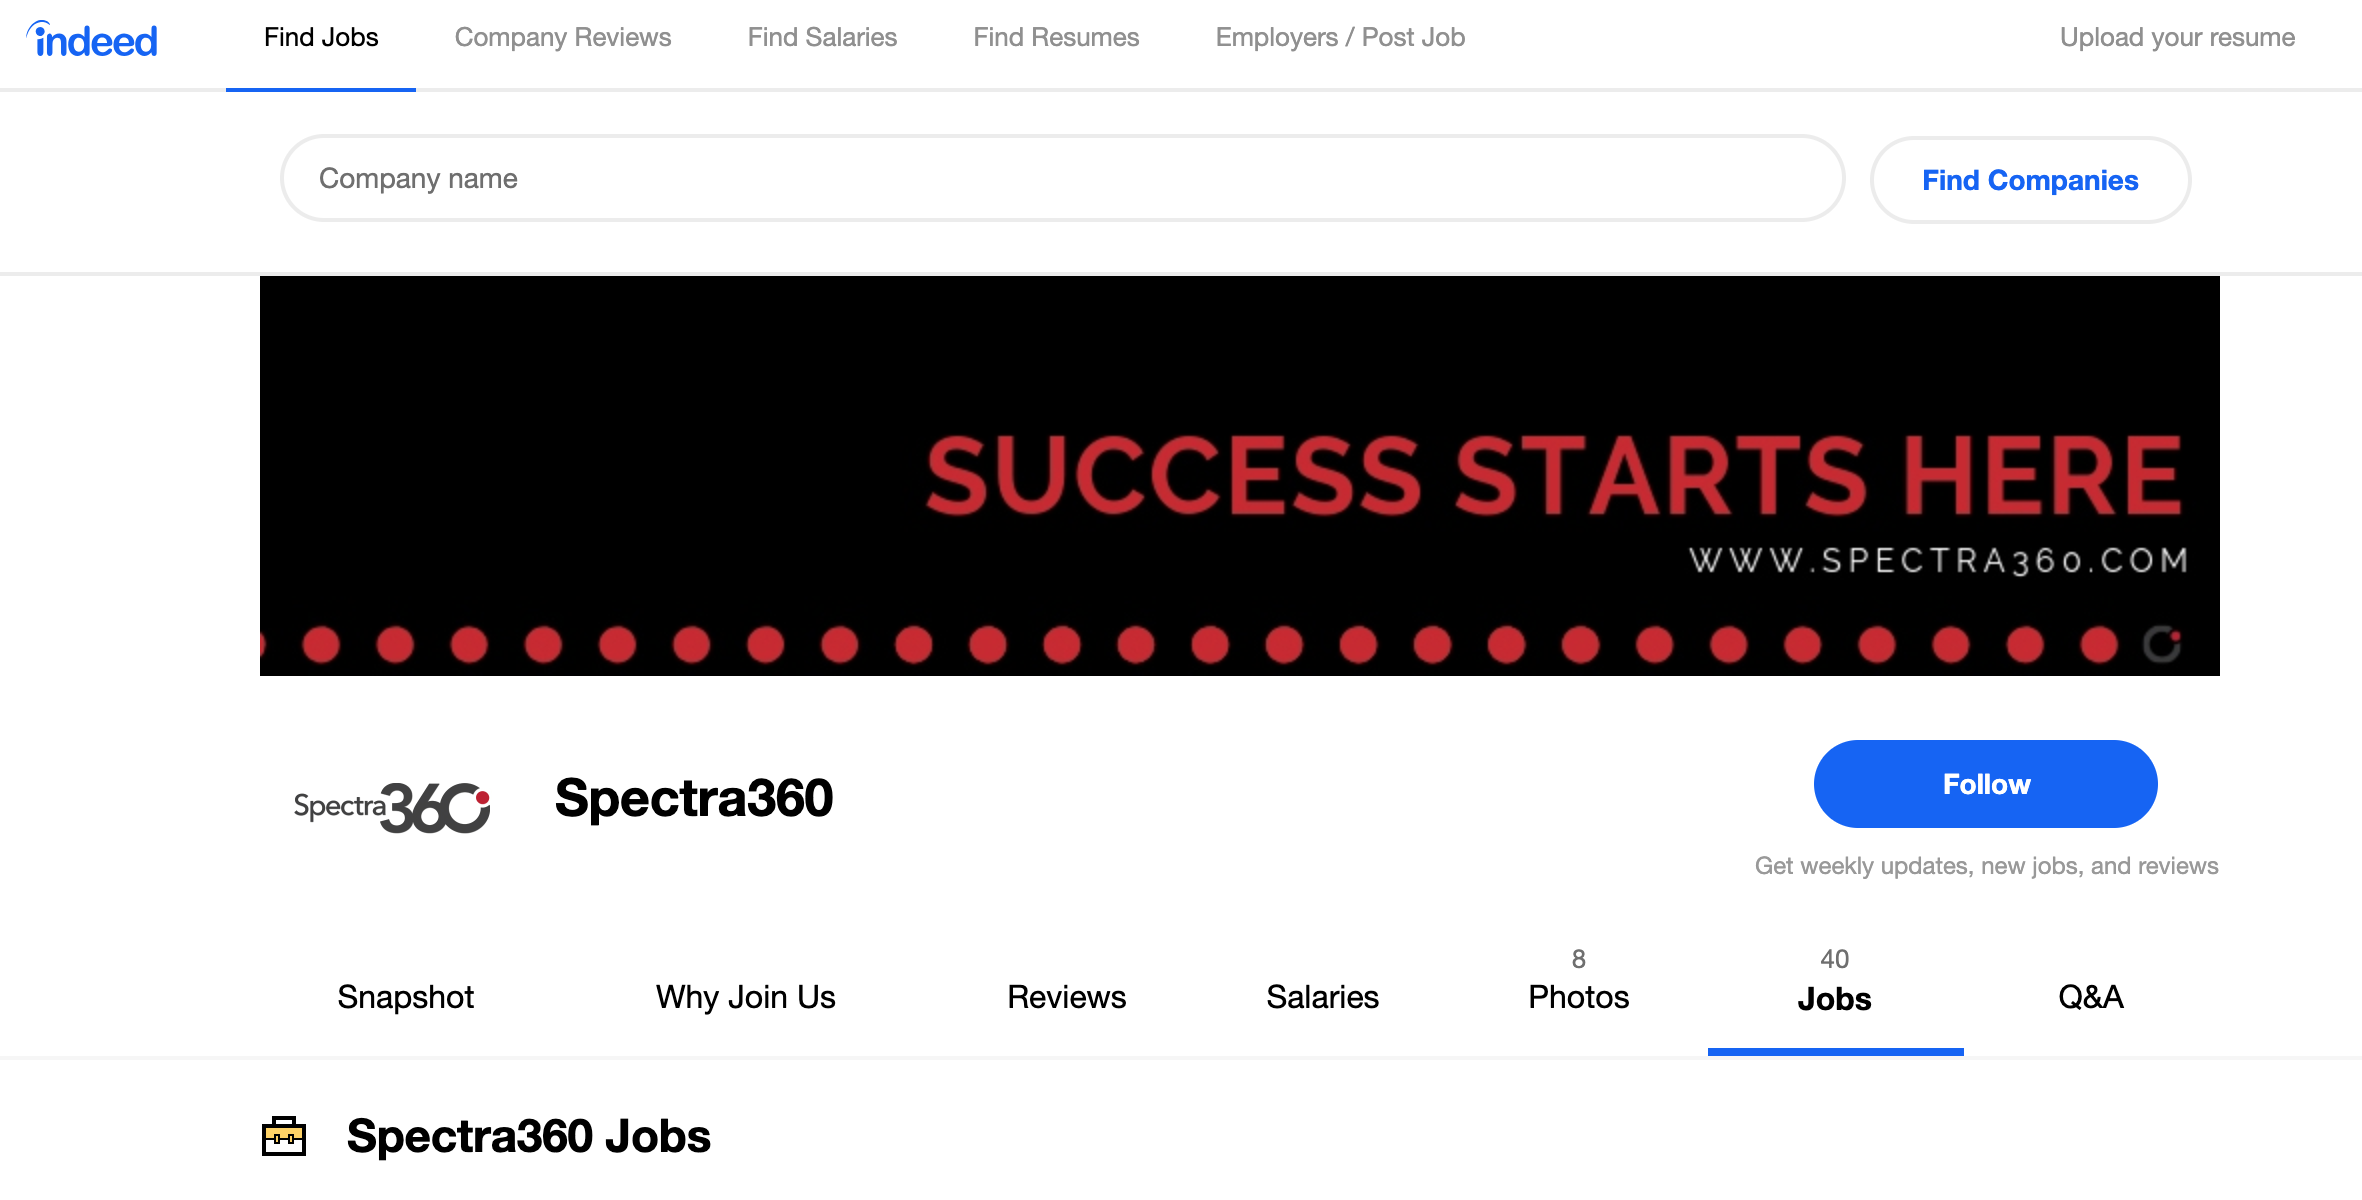 spectra360 indeed page